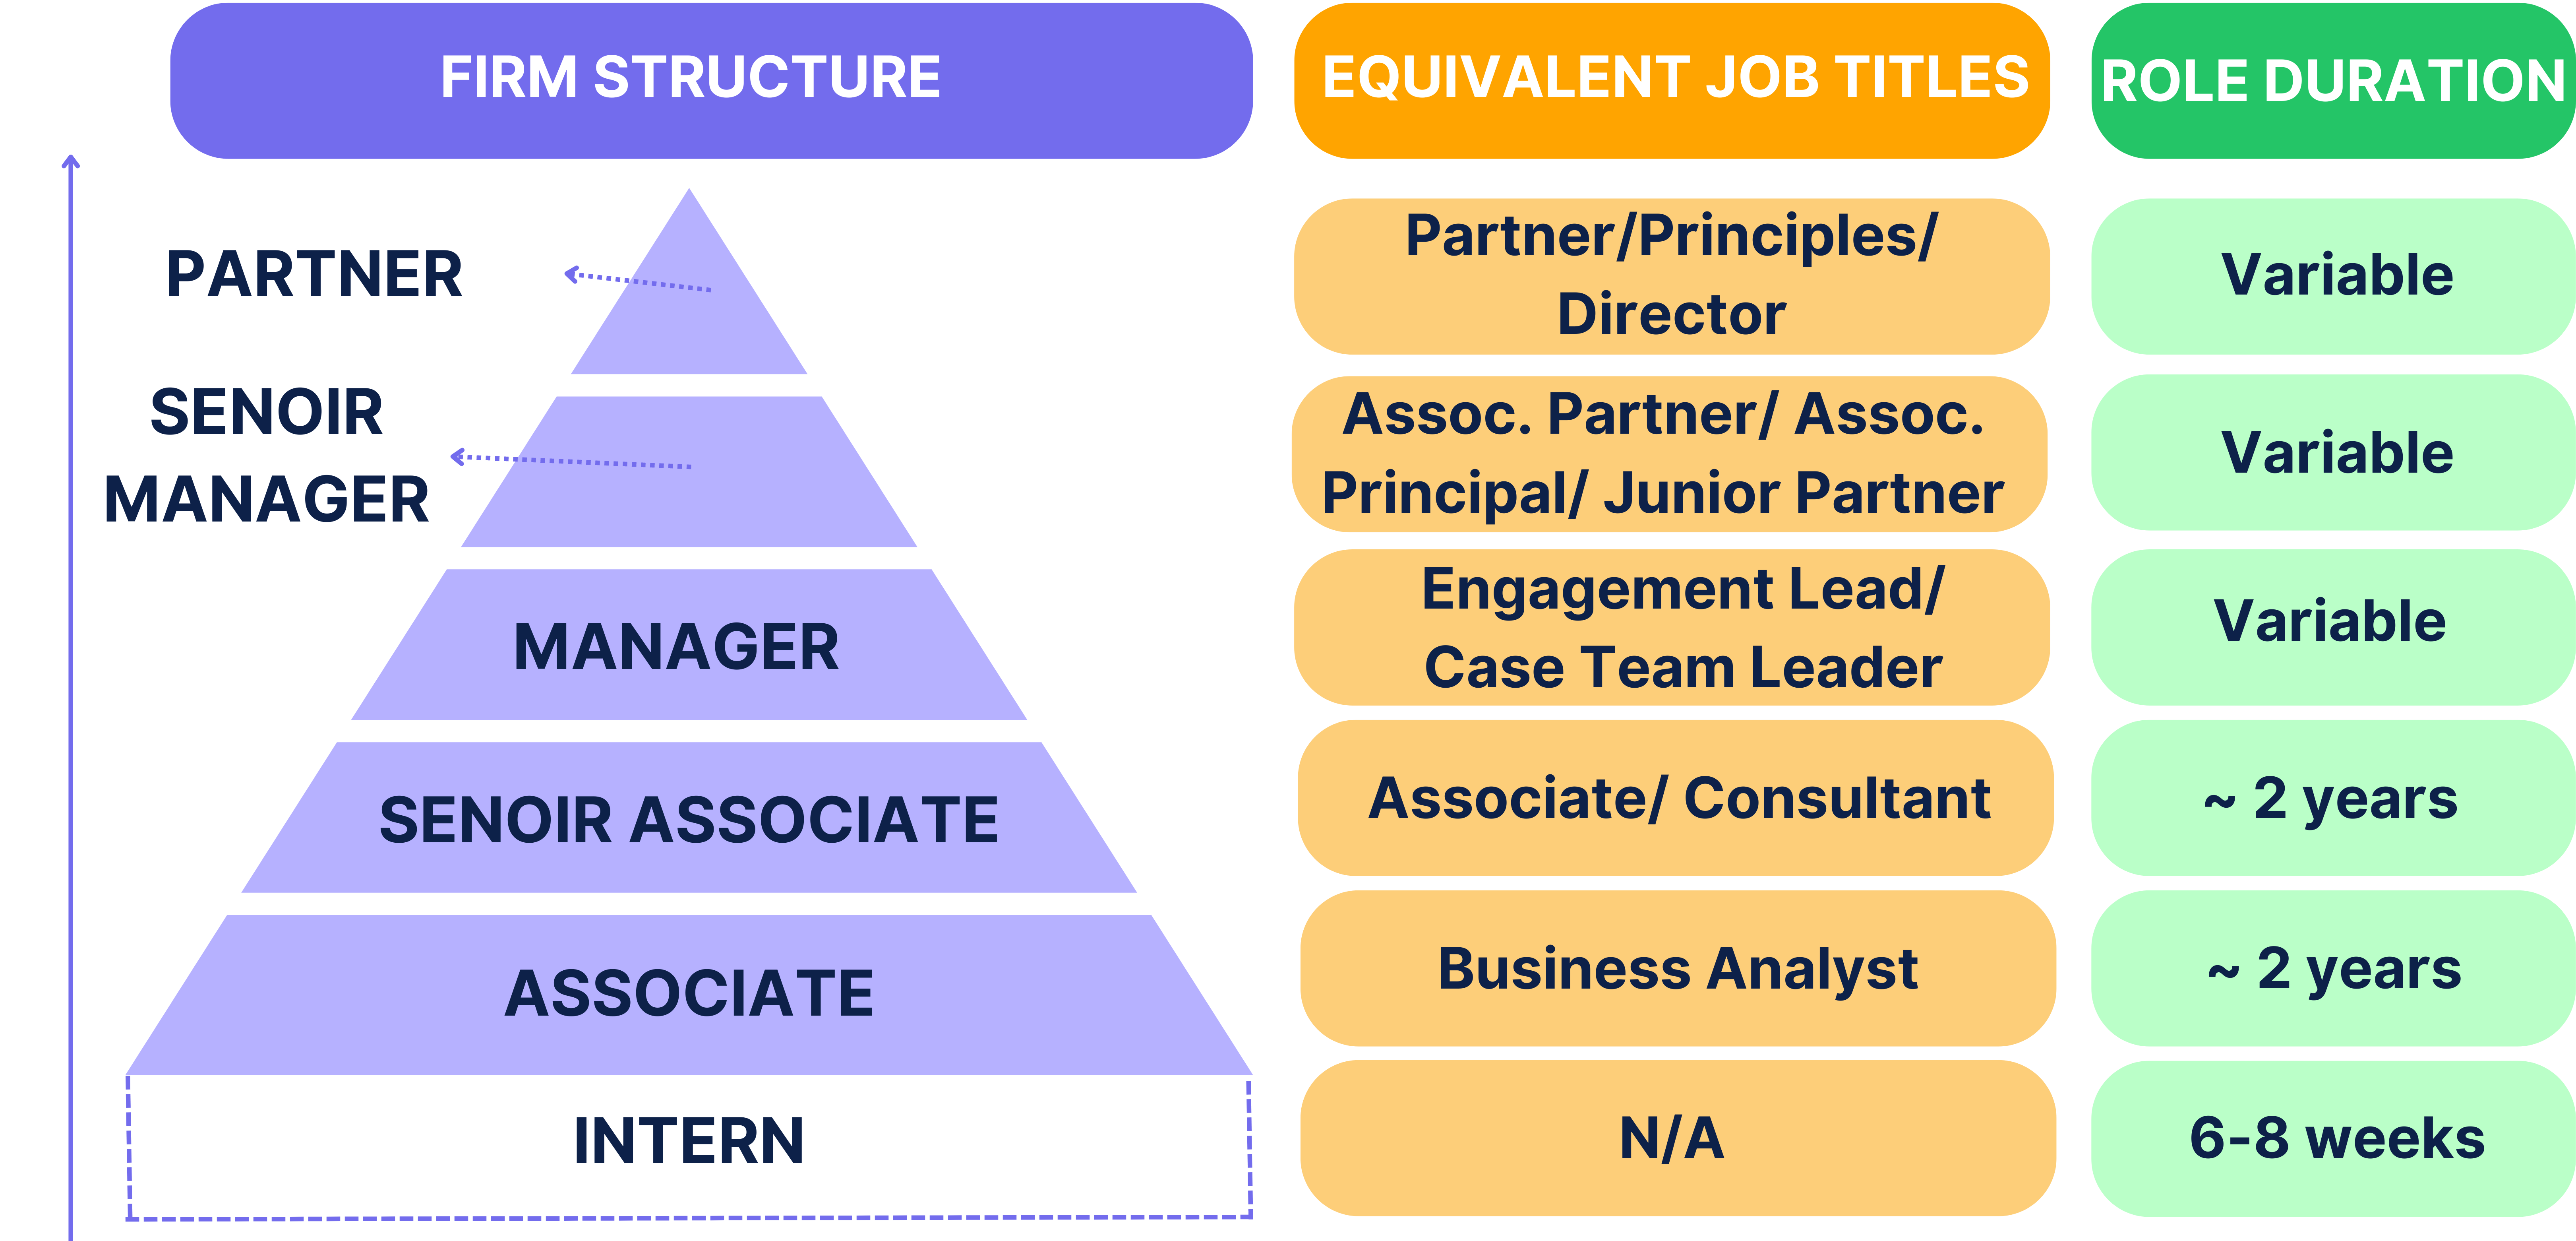 Firm Structure Overview